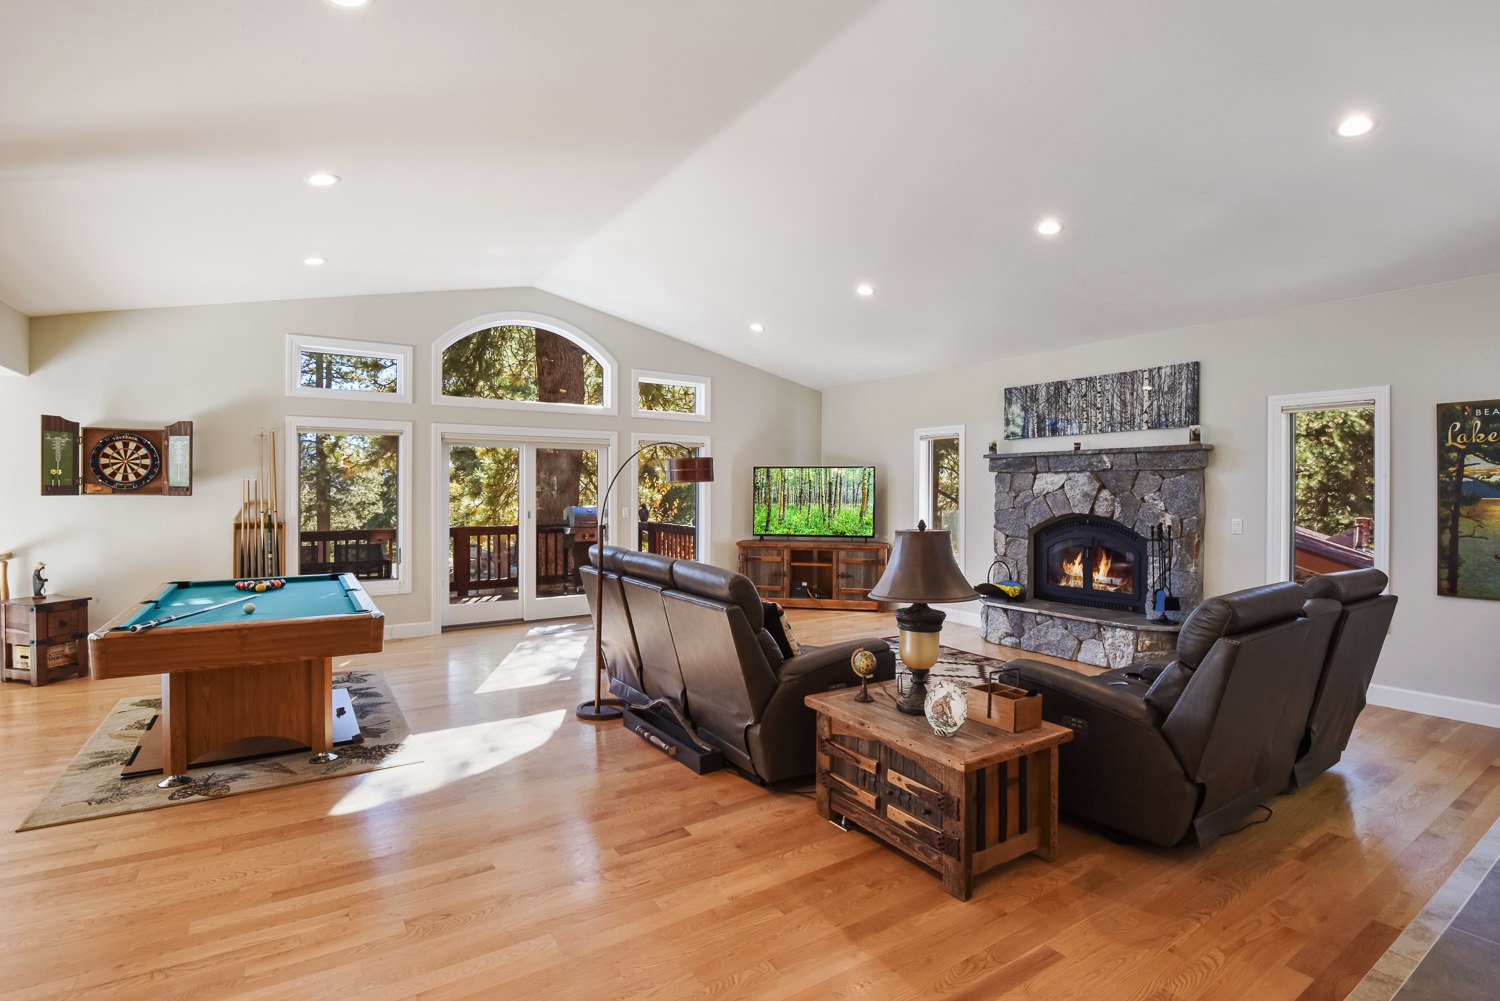 Open living space with pool table, dart set, gas fireplace, Smart TV, and deck access